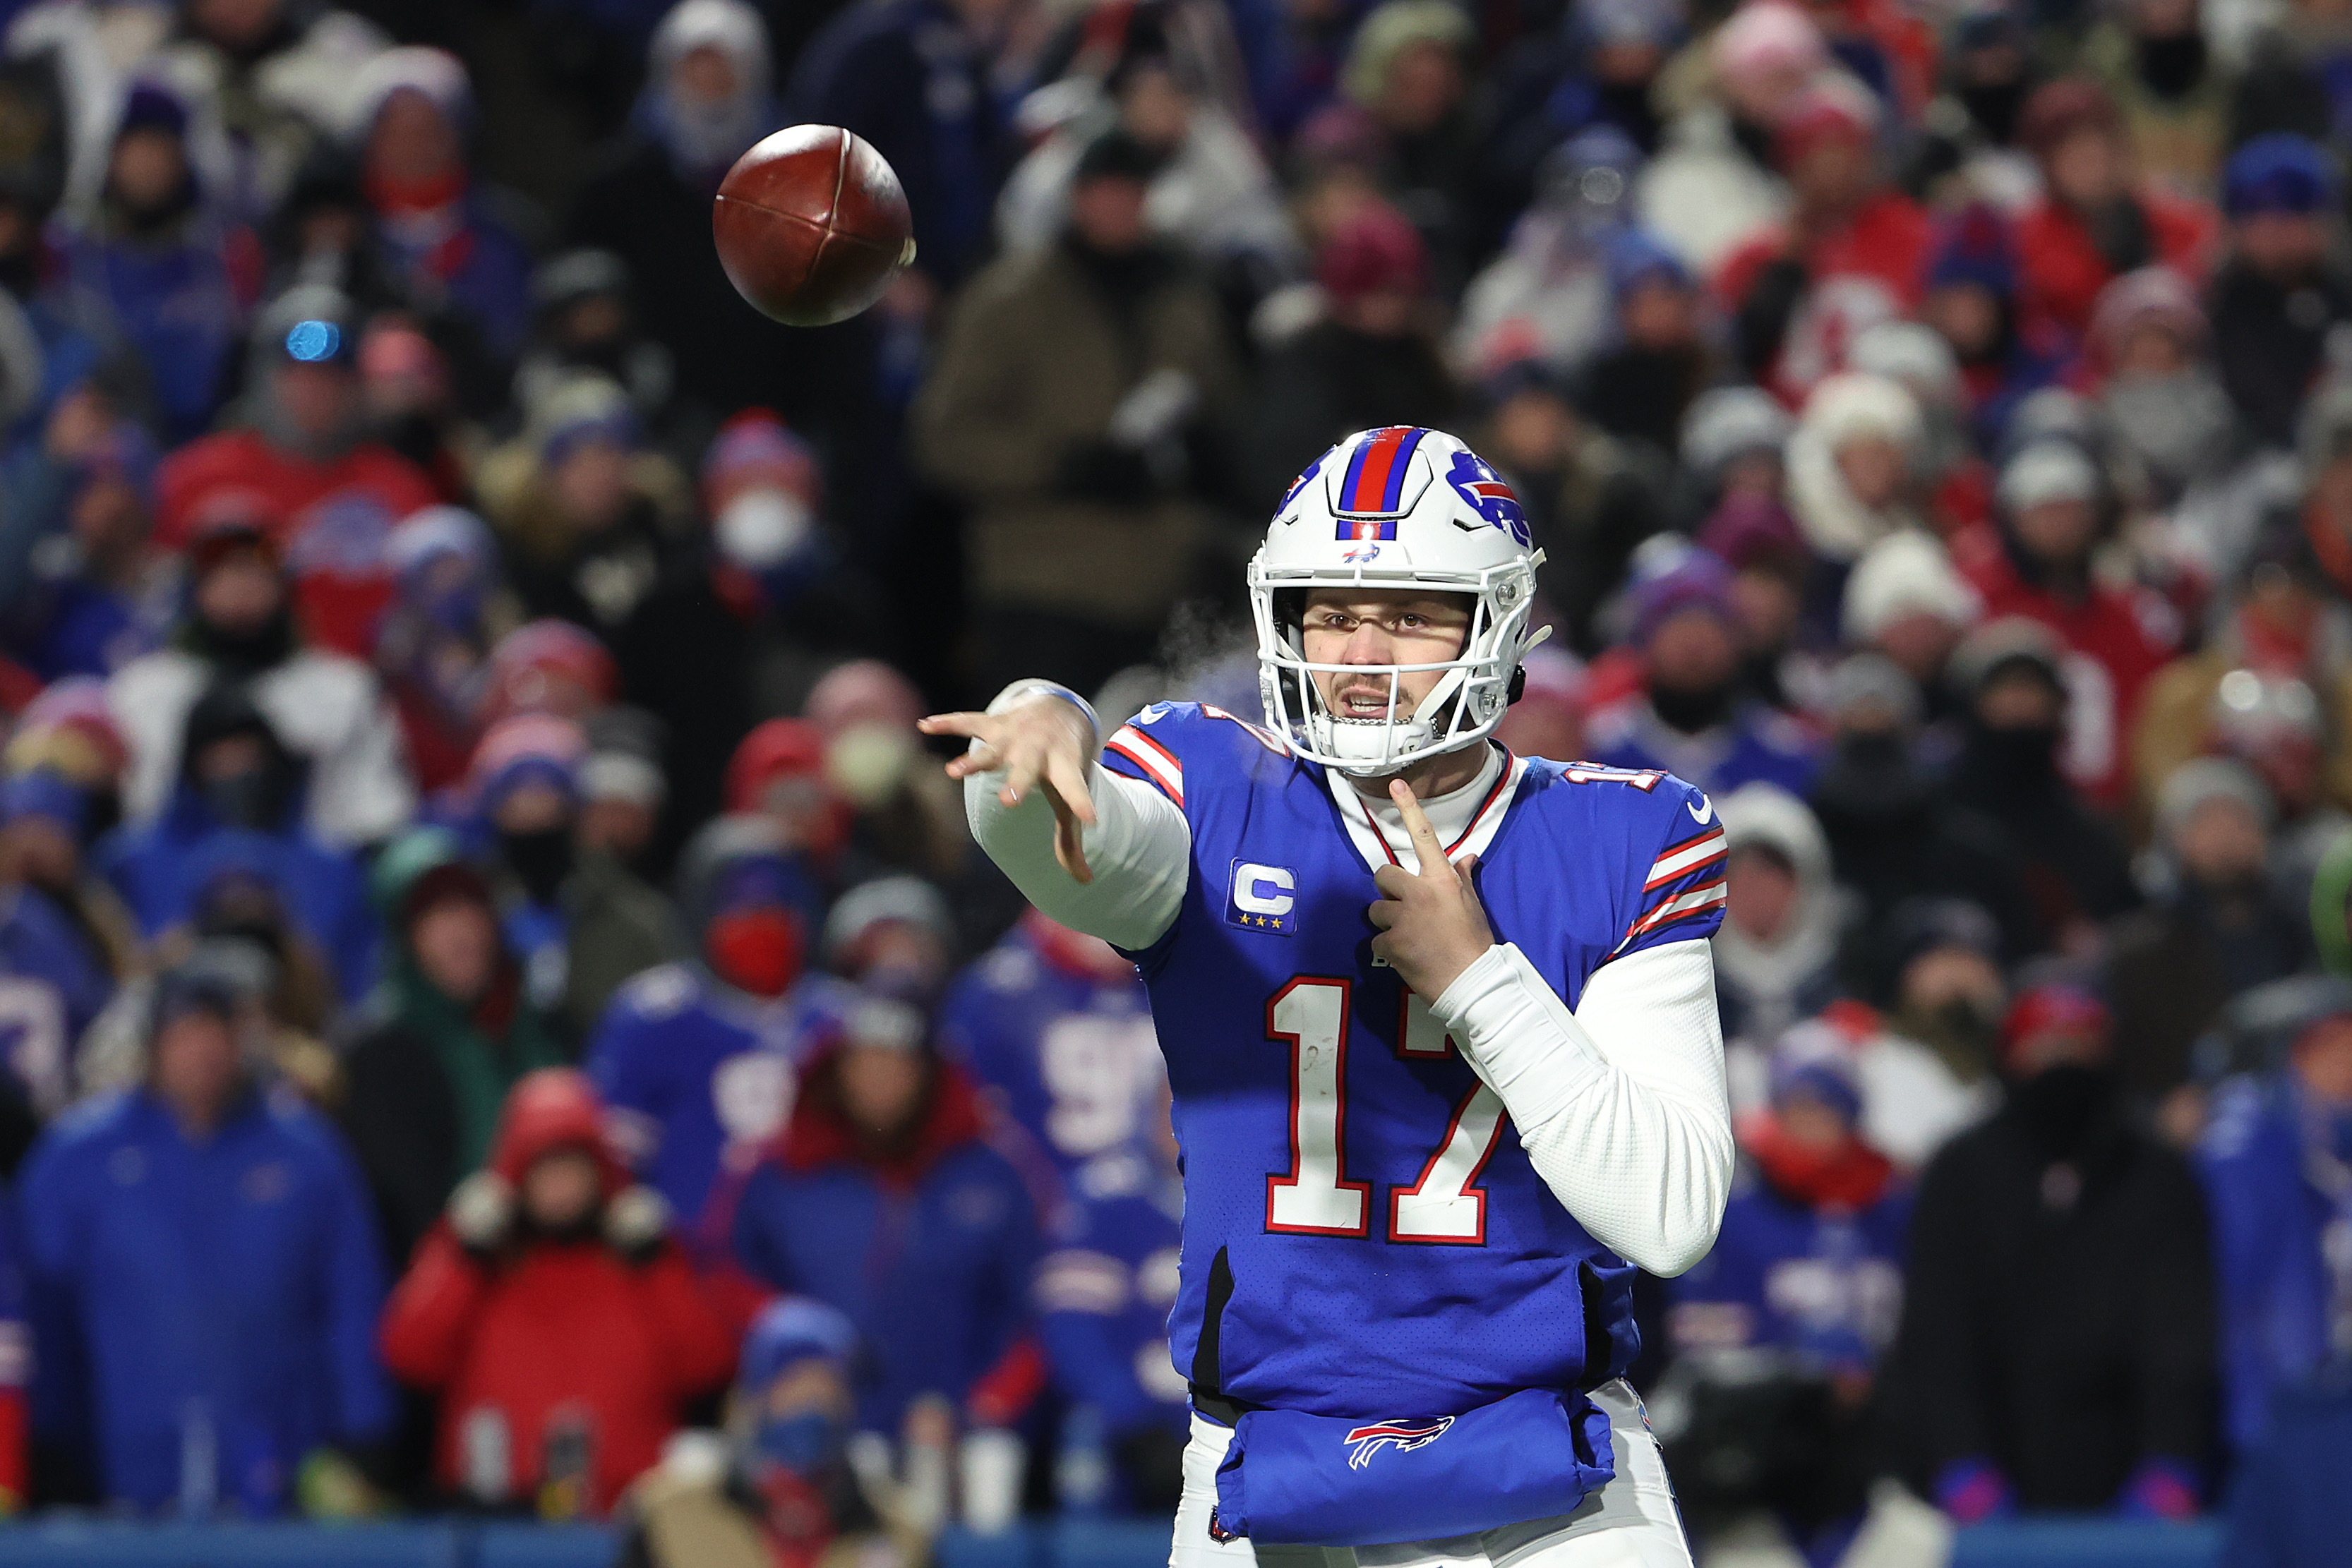 Josh Allen #17 of the Buffalo Bills throws a pass against the New England Patriots during the second quarter in the AFC Wild Card playoff game at Highmark Stadium on January 15, 2022 in Buffalo, New York.